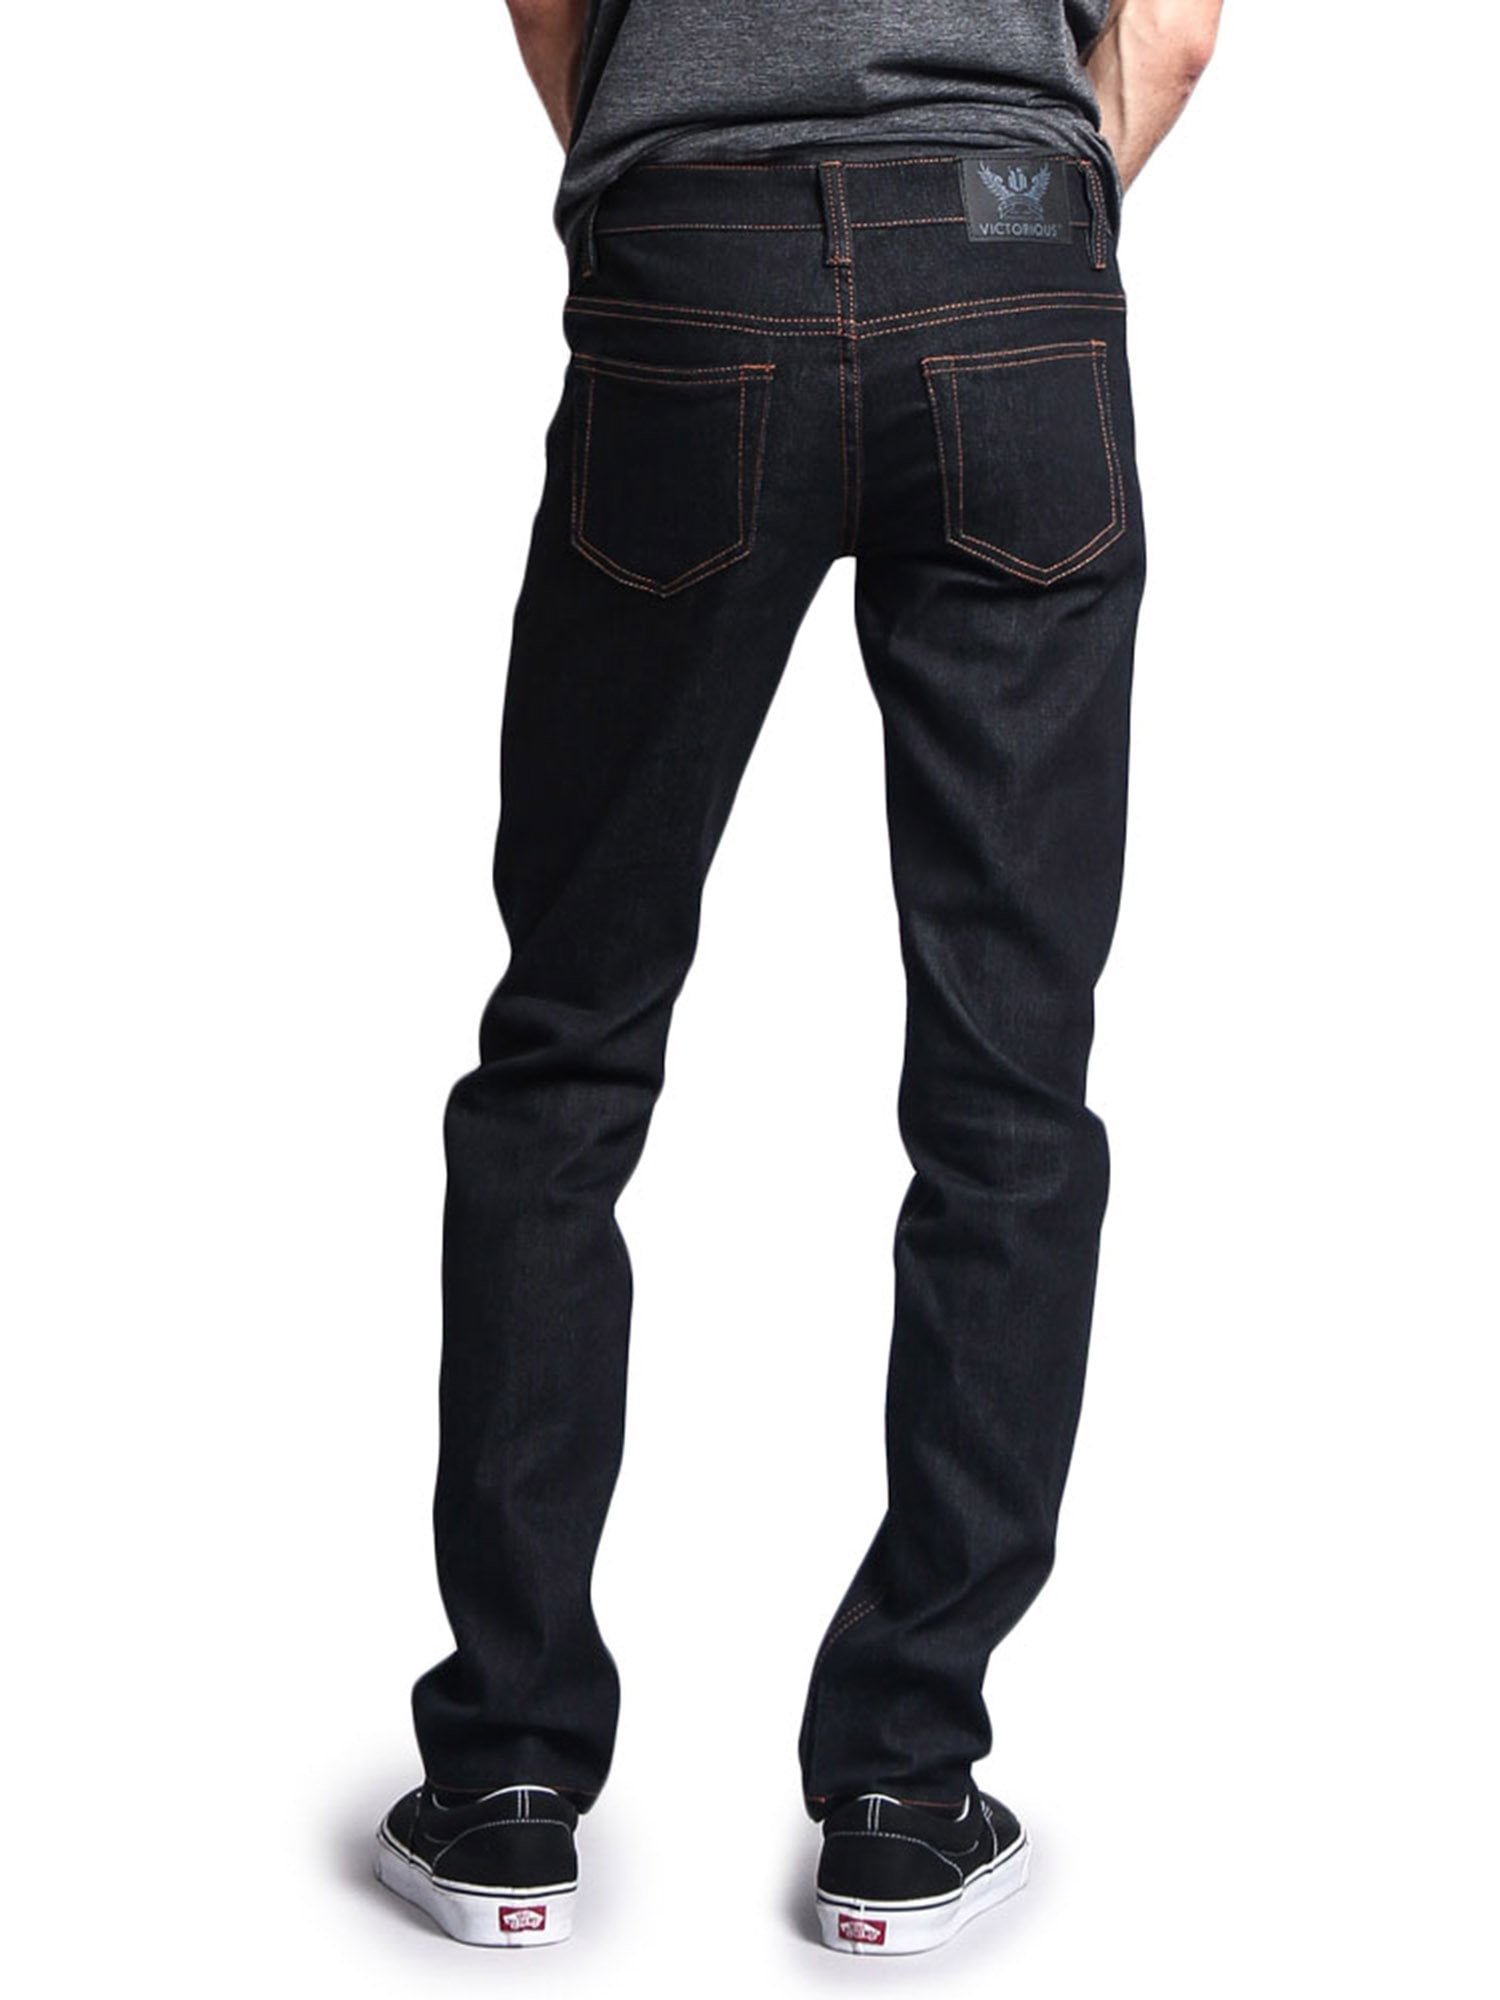 Denim Indigo/Timber Jeans DL938 Skinny Unwashed Fit Victorious - Men\'s 40/30 - Raw